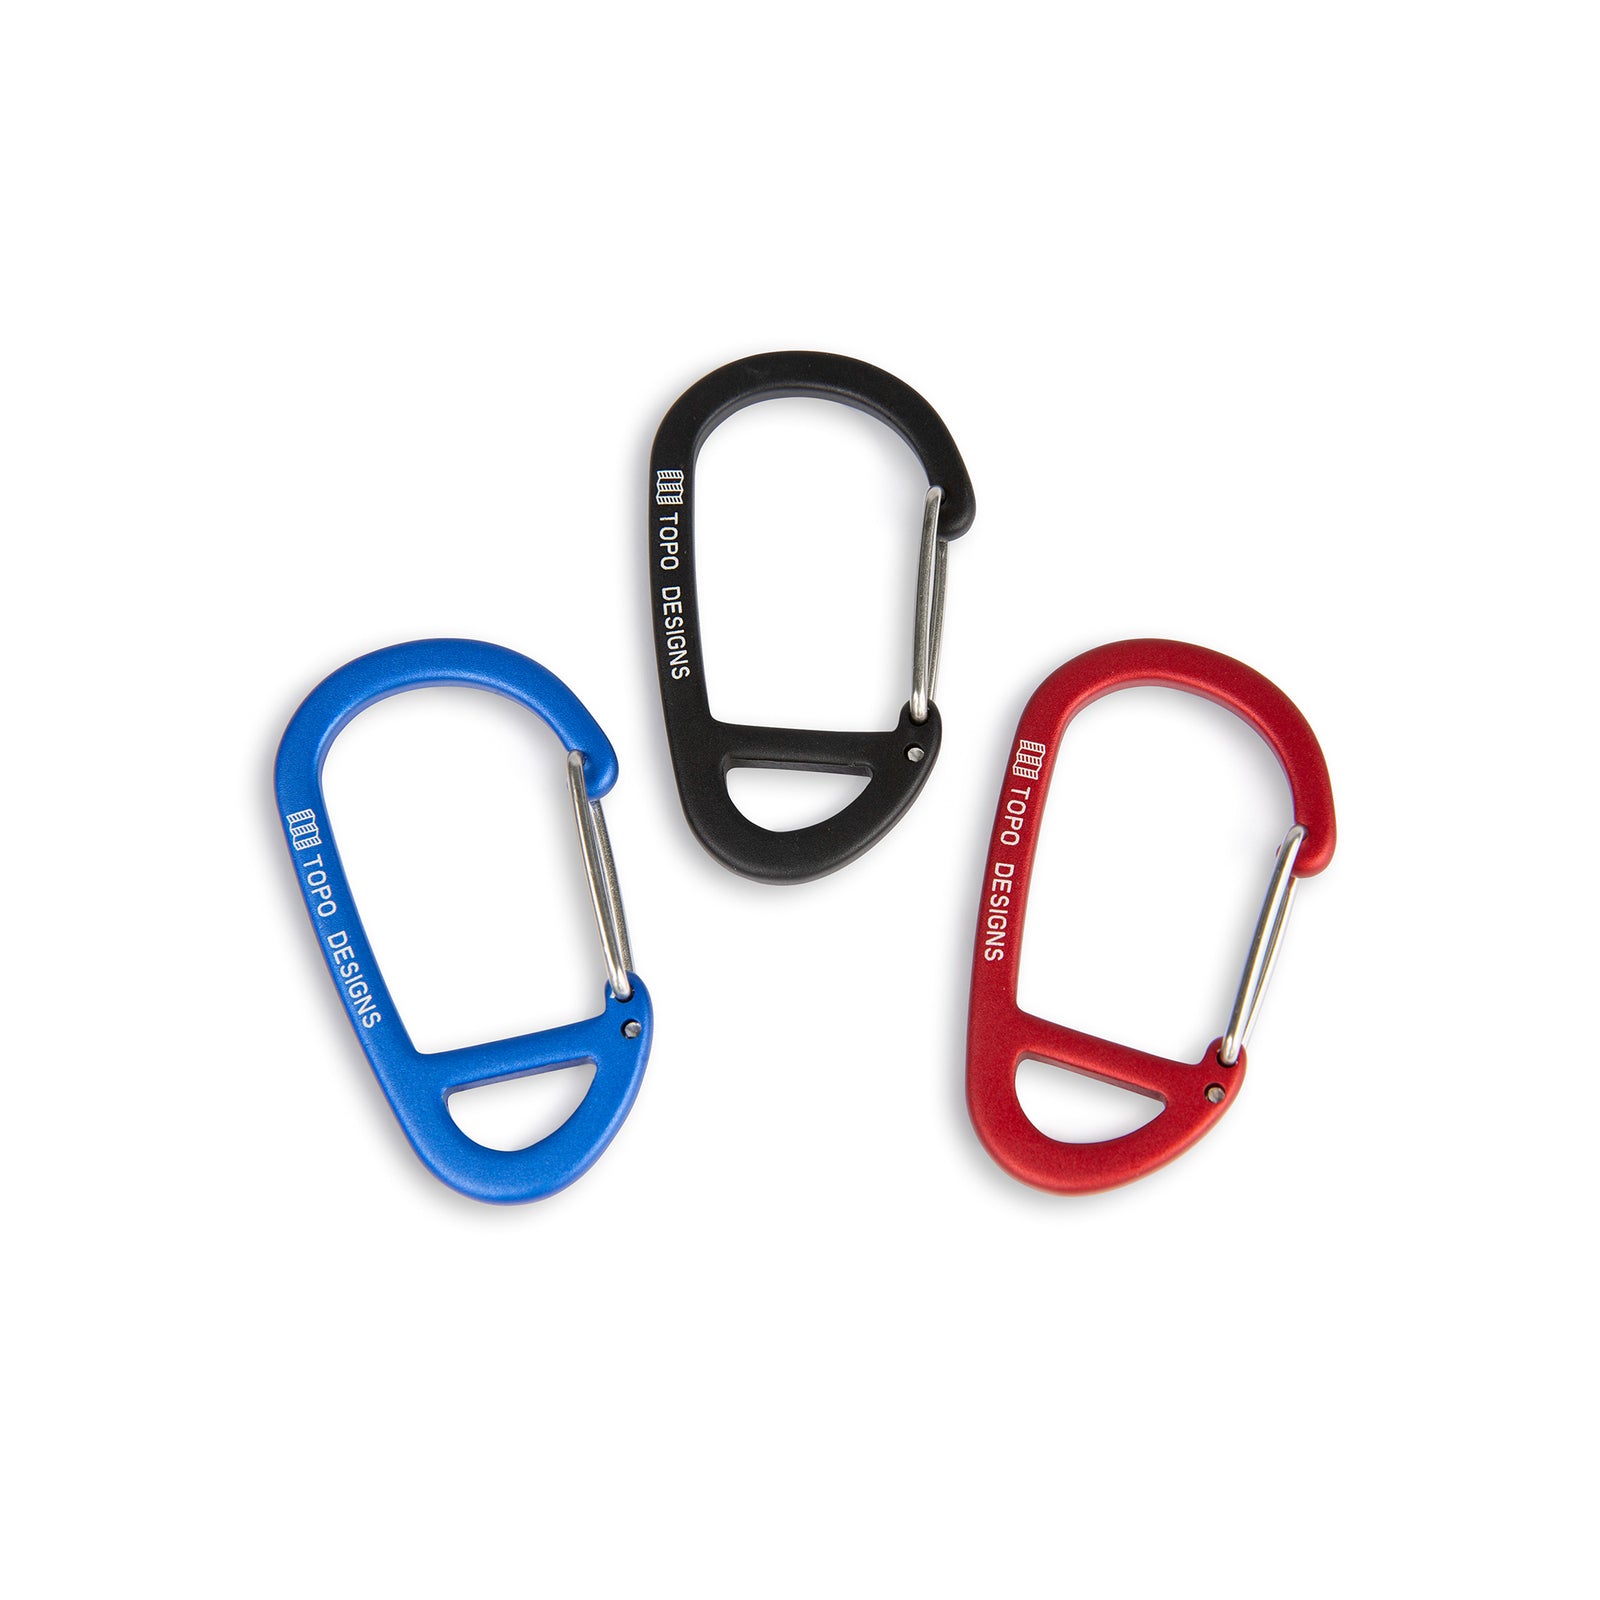 Topo Designs Carabiner 3-Pack in "Black / Red / Blue" key chain clips in size "49mm".